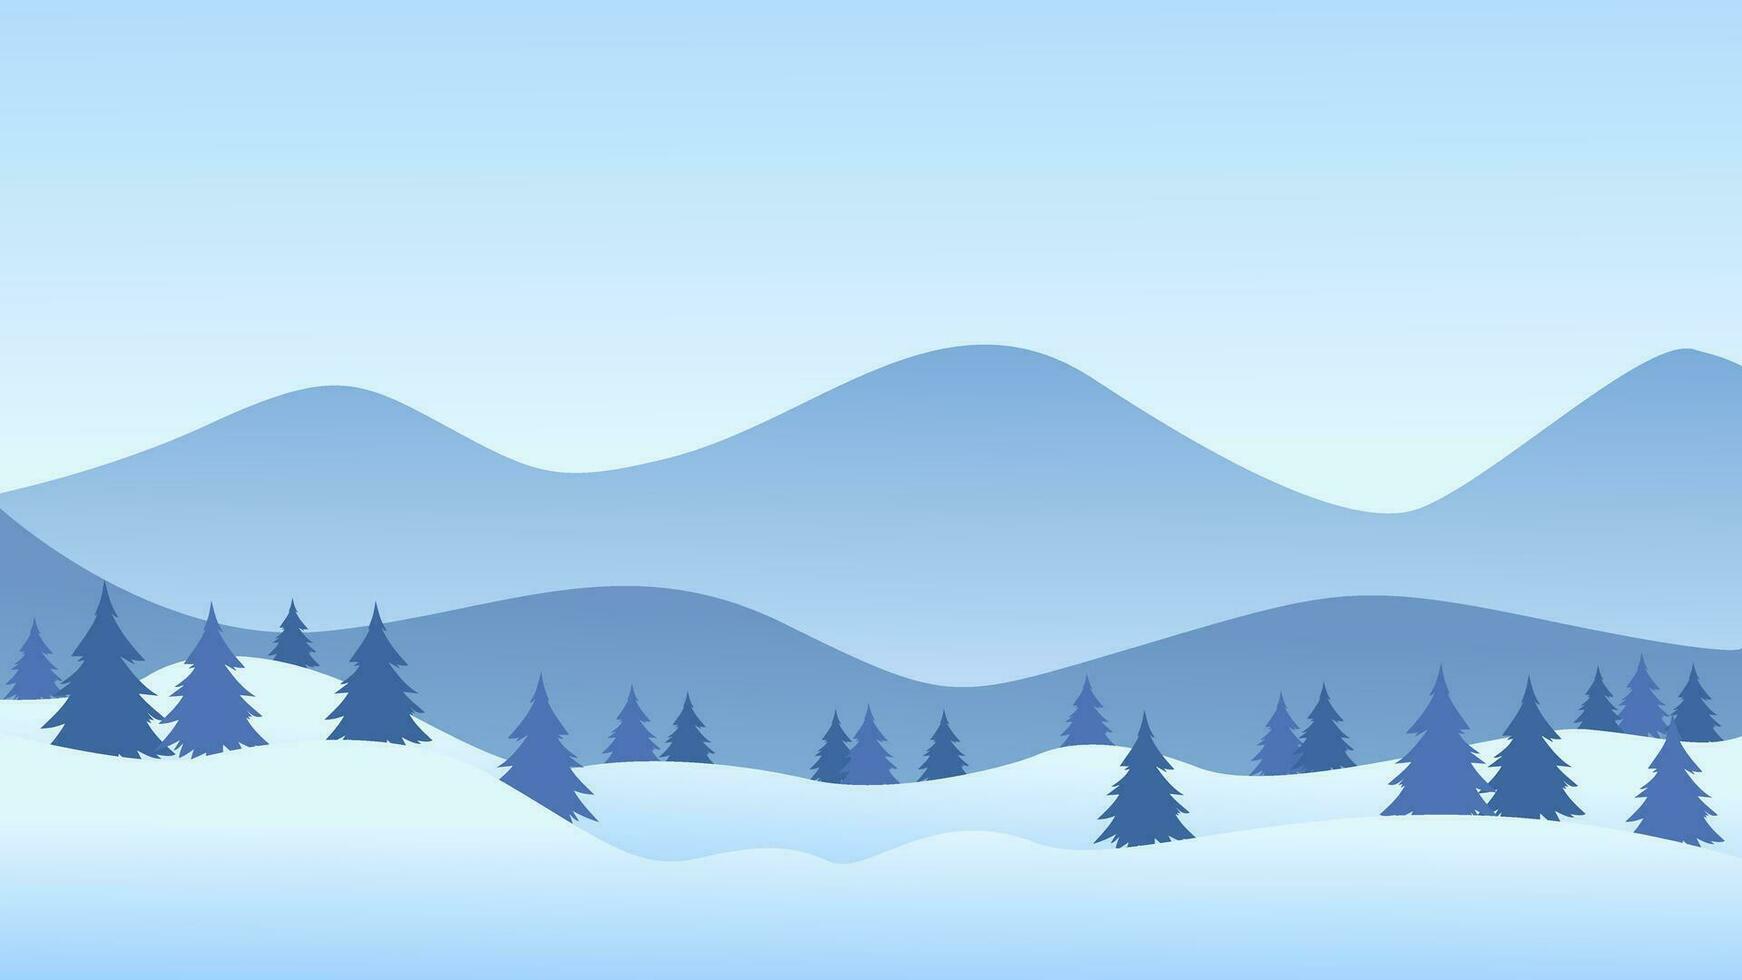 Simple winter landscape vector illustration. Snow hills, mountains, and pine forests background, winter snow-themed wallpaper